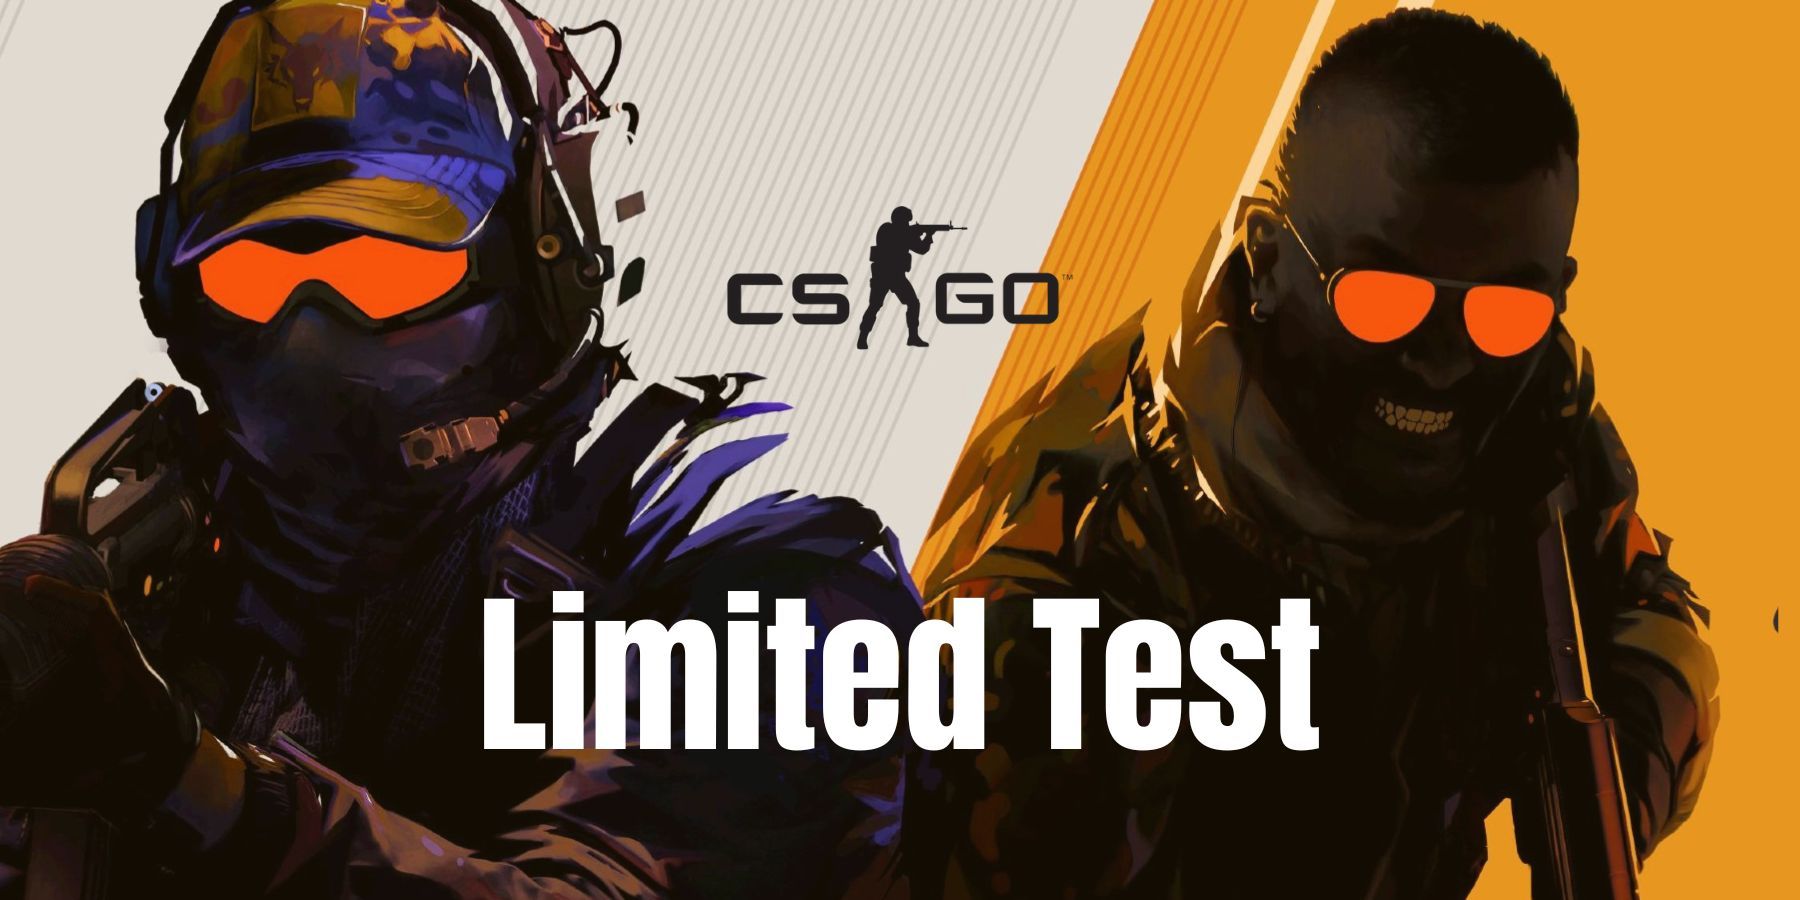 Here's how to play the Counter Strike 2 Limited Beta Test